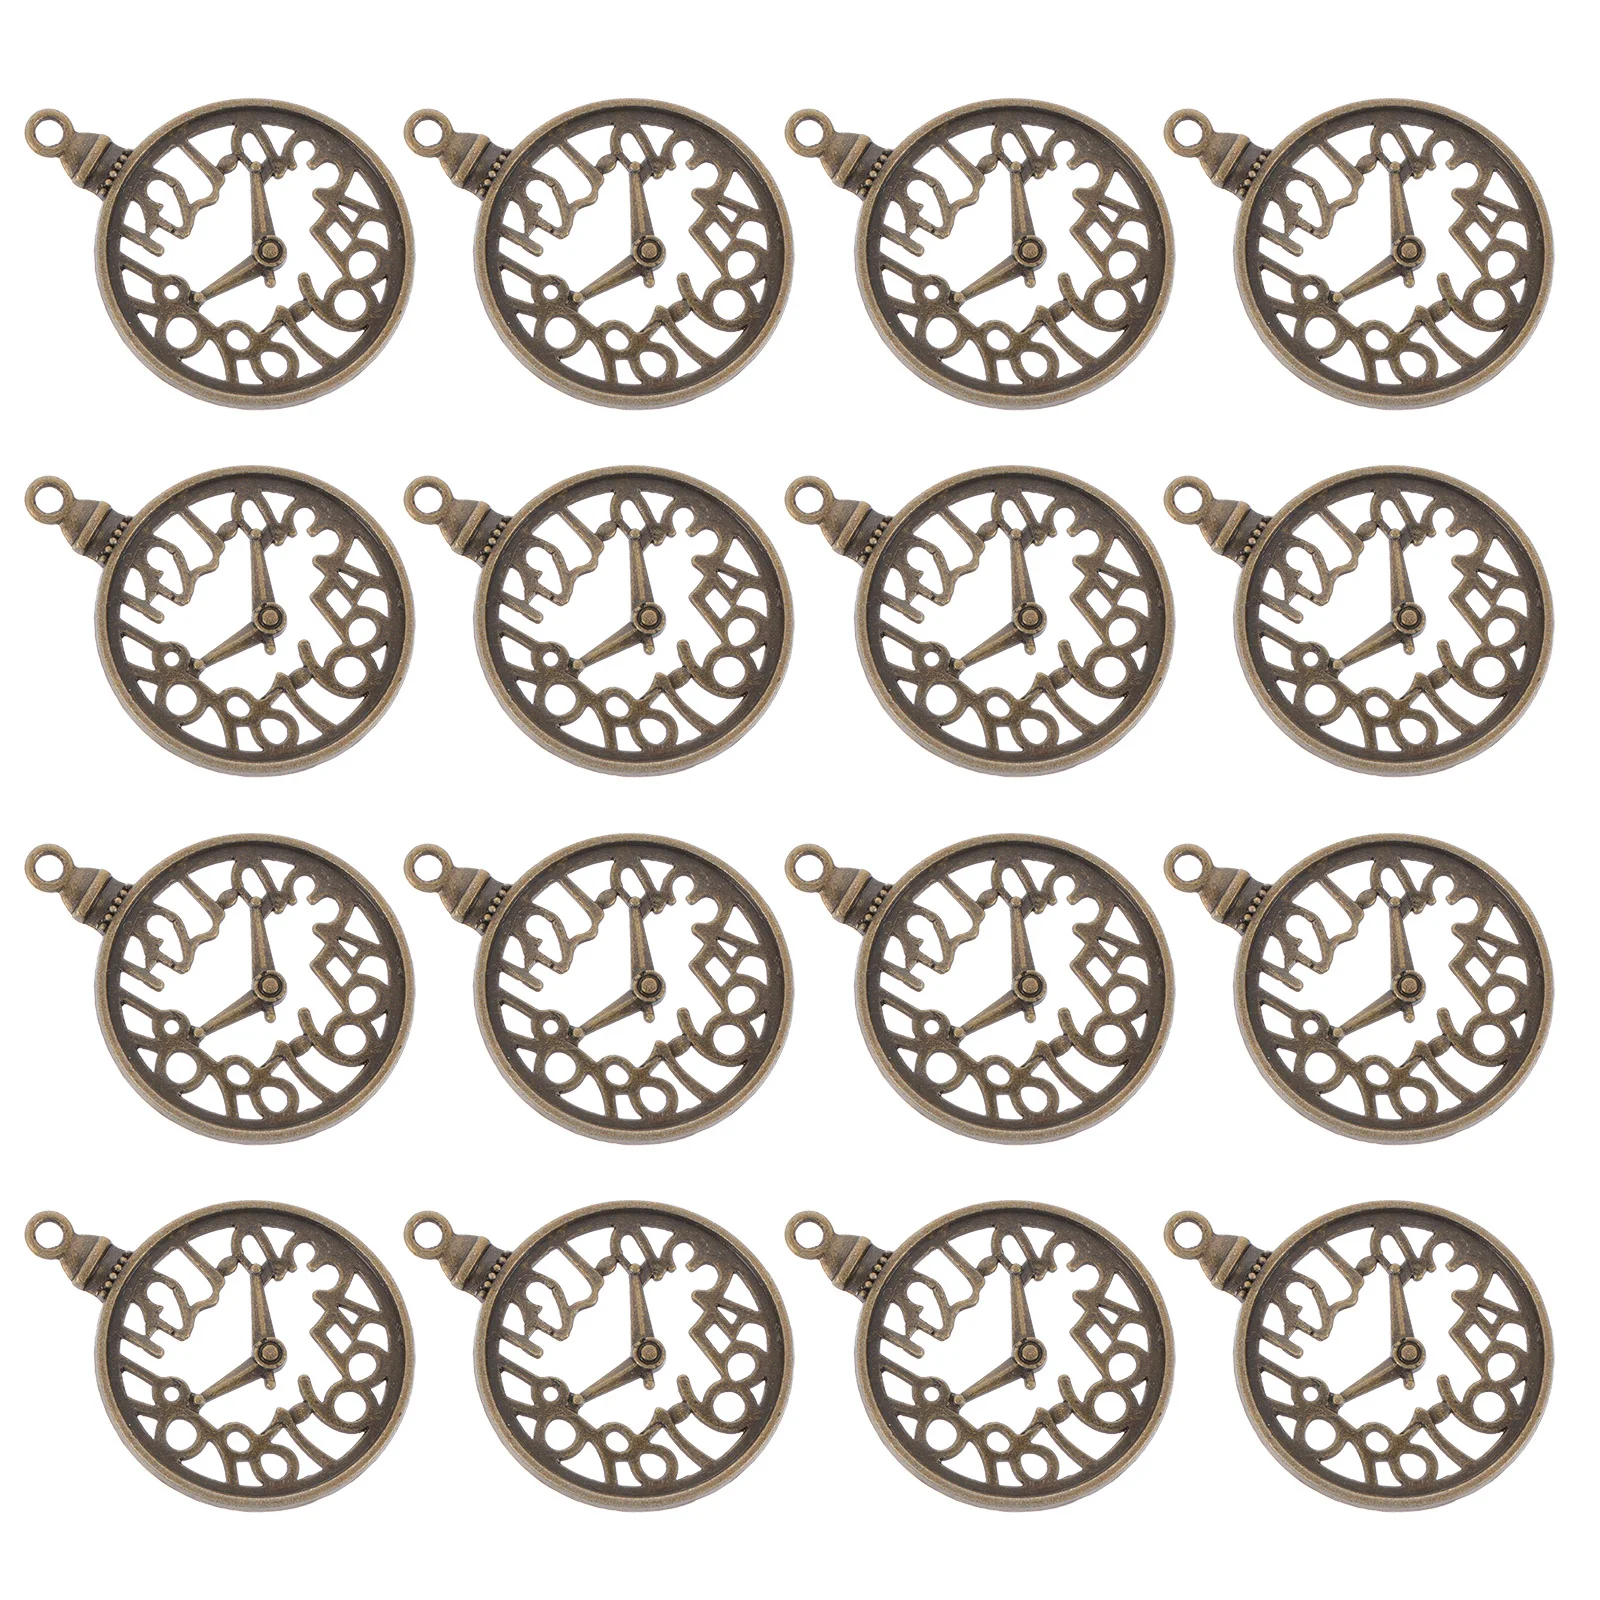 

60 Clock Charm Pendant Vintage Witch Charms DIY Steampunk Gears Charms for Necklace Bracelet Jewelry Making Crafting